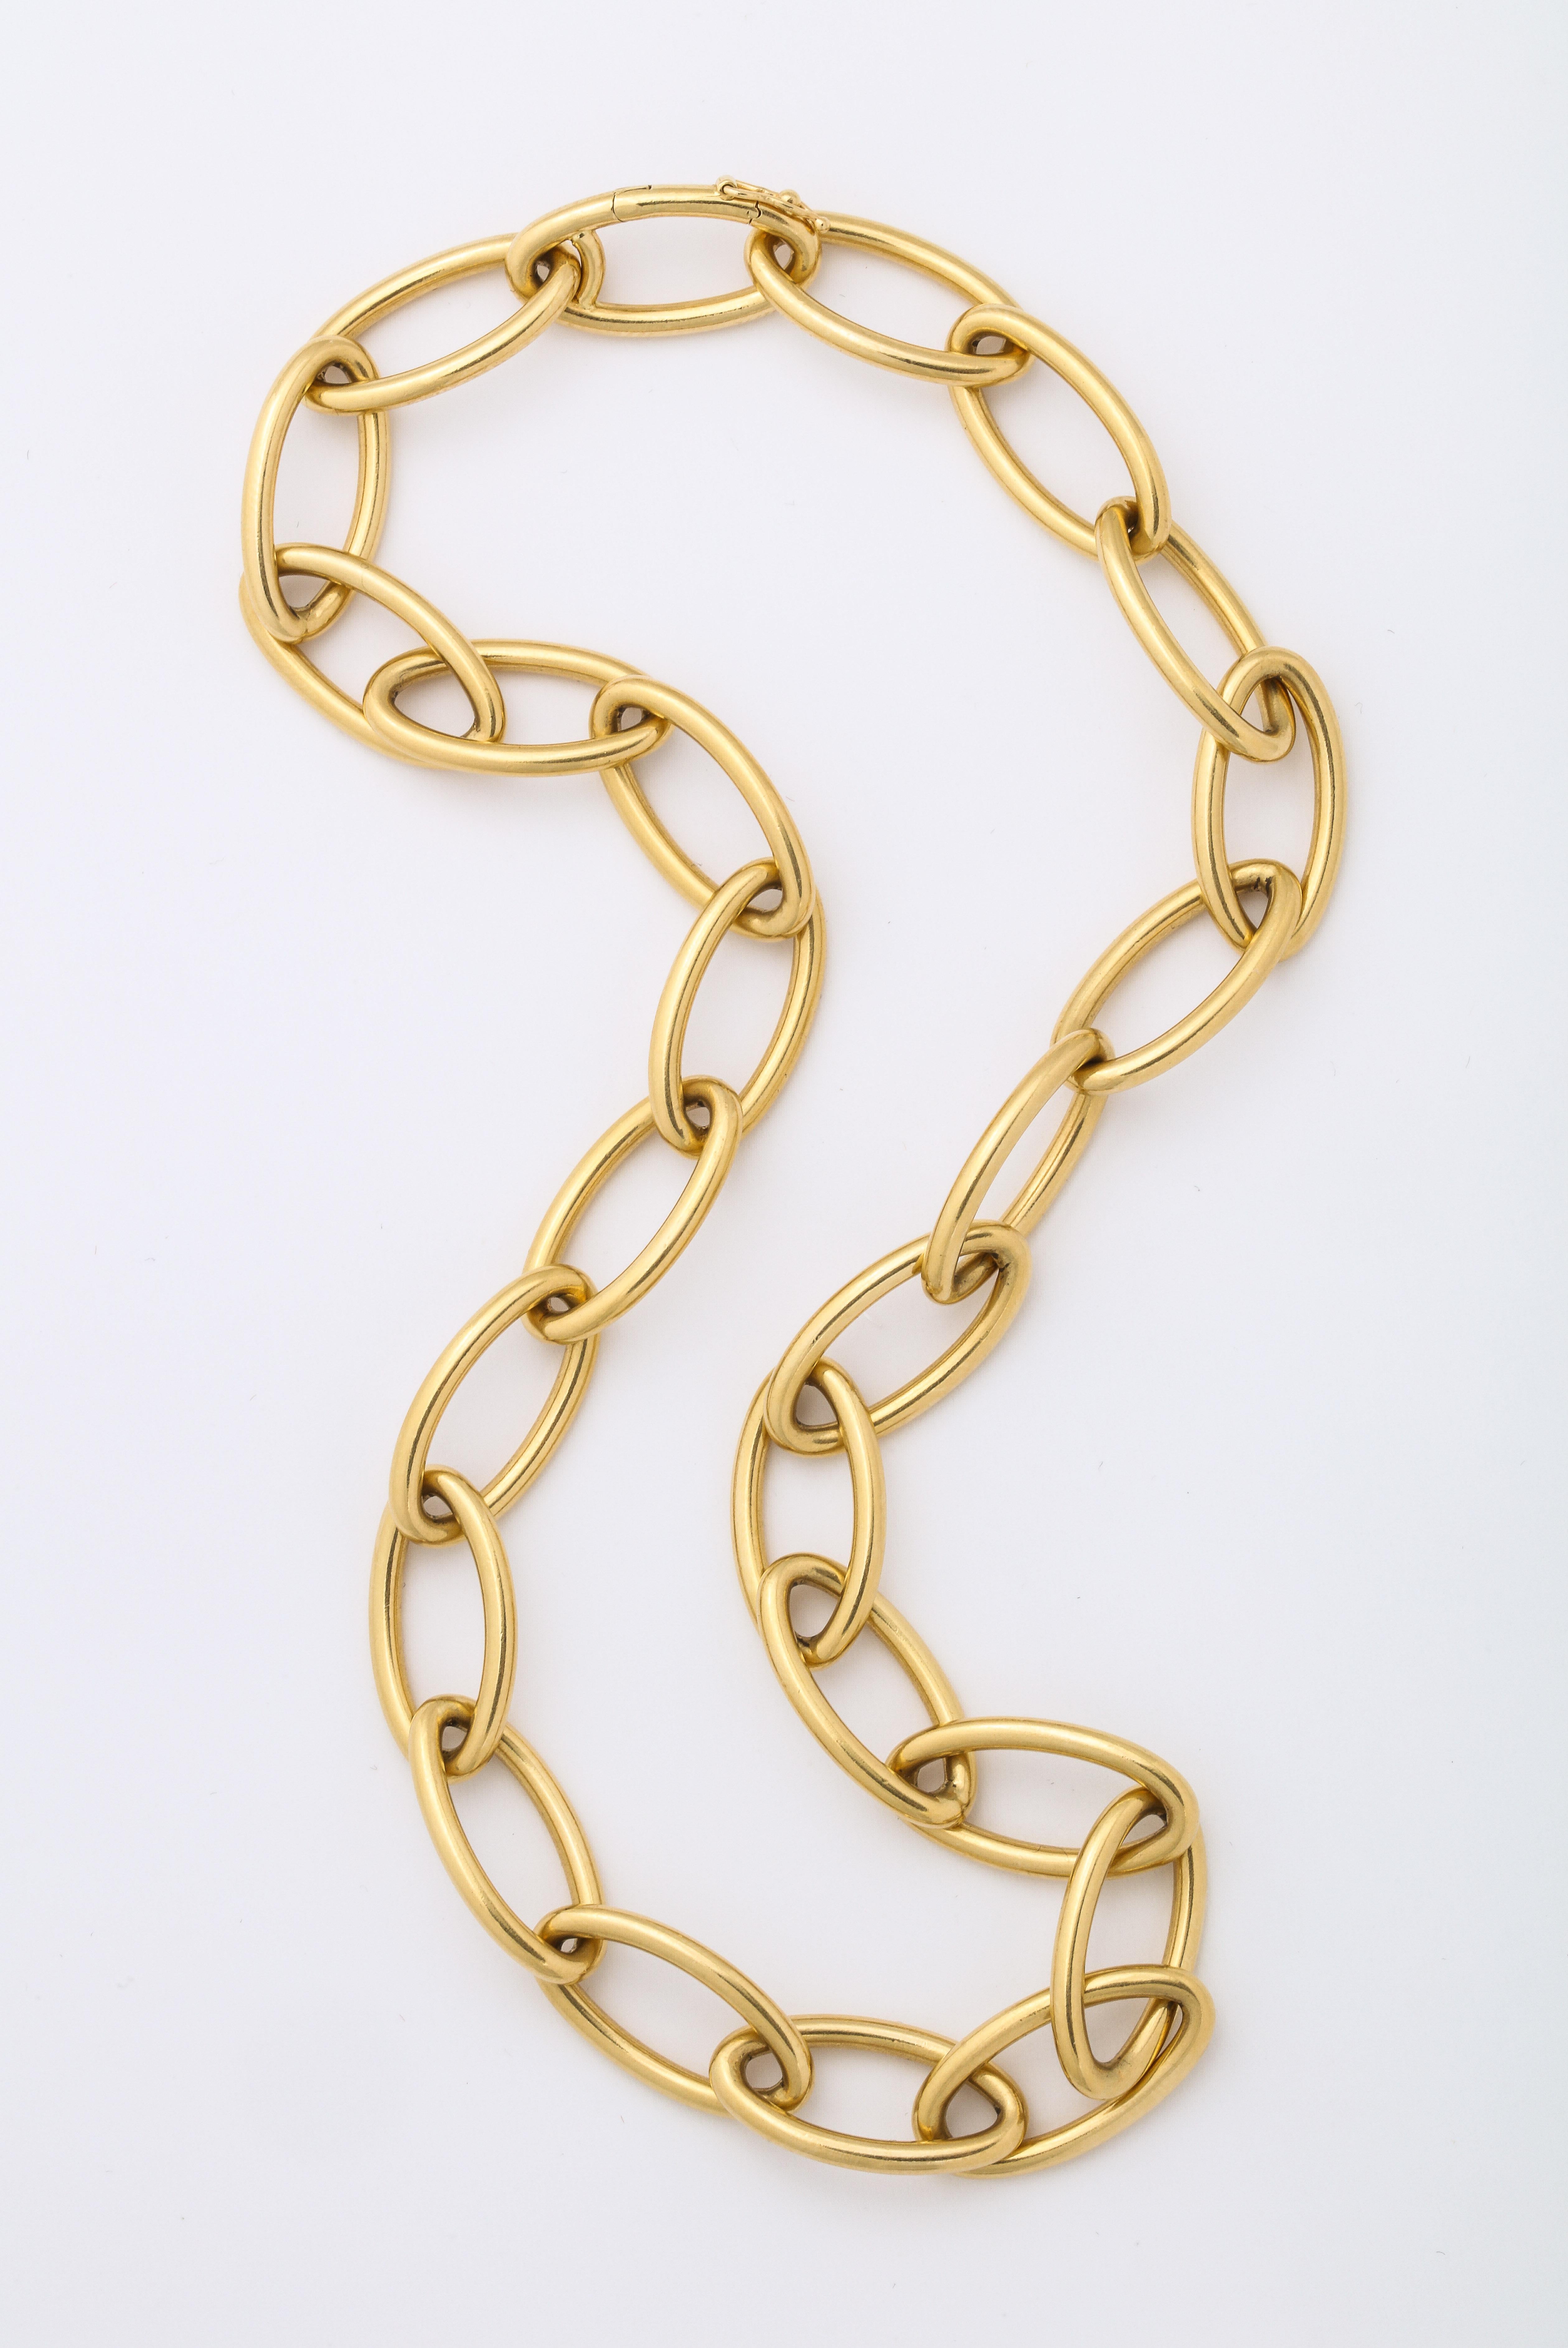 A great signed Verdura open chain 18 kt gold necklace that can be doubled and worn as a bracelet. 